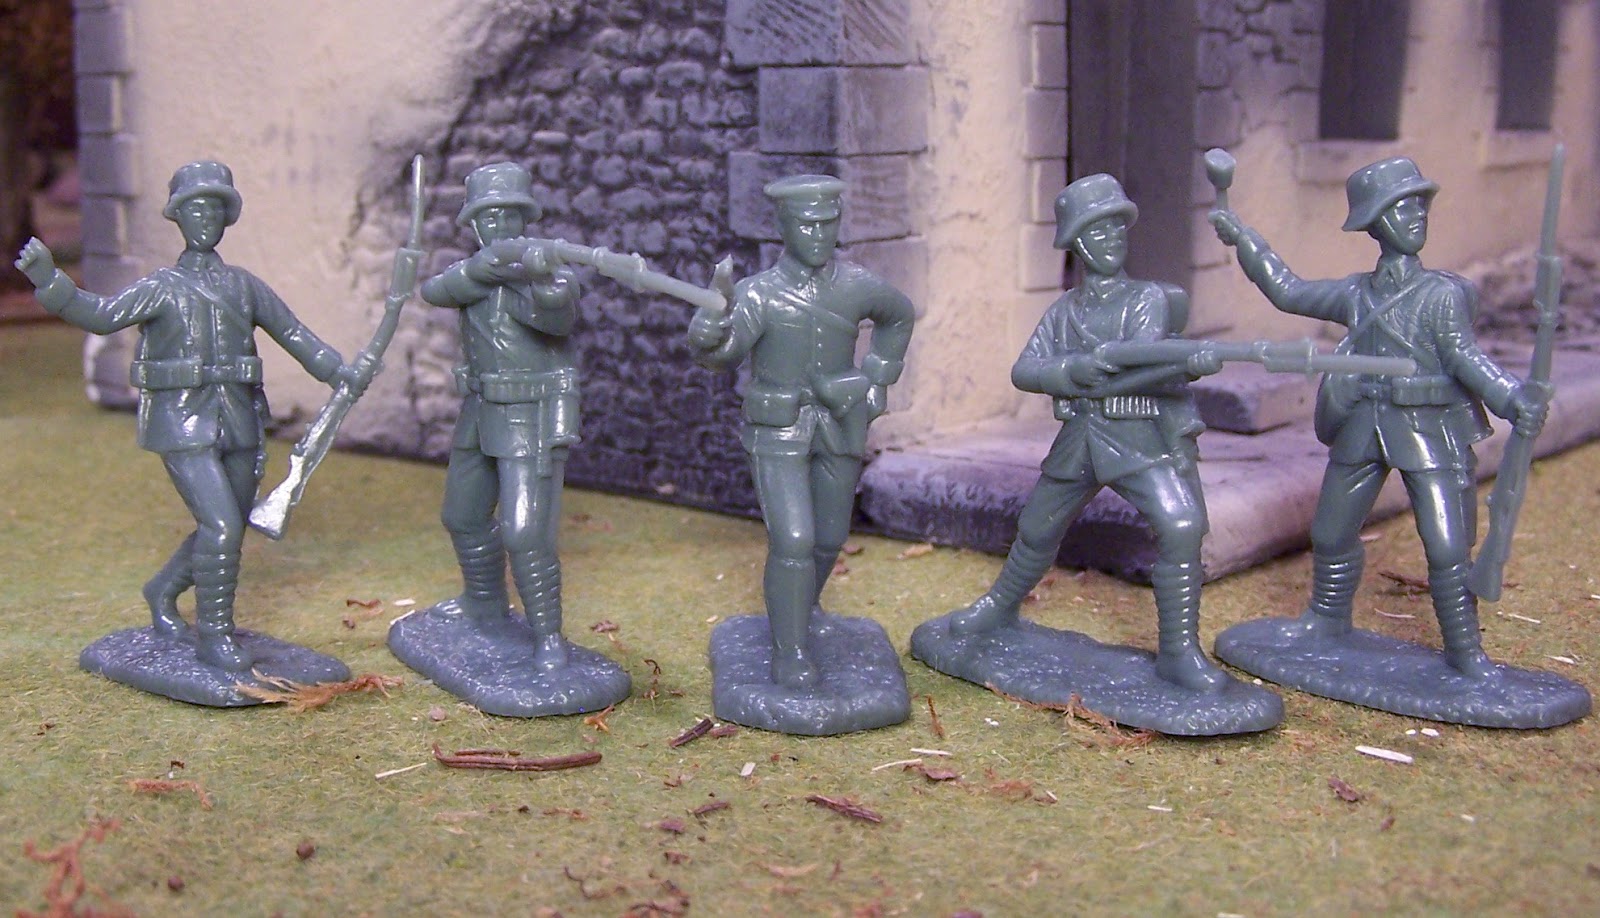 WWII Plastic Toy Soldiers Armies In Plastic Toy Soldiers